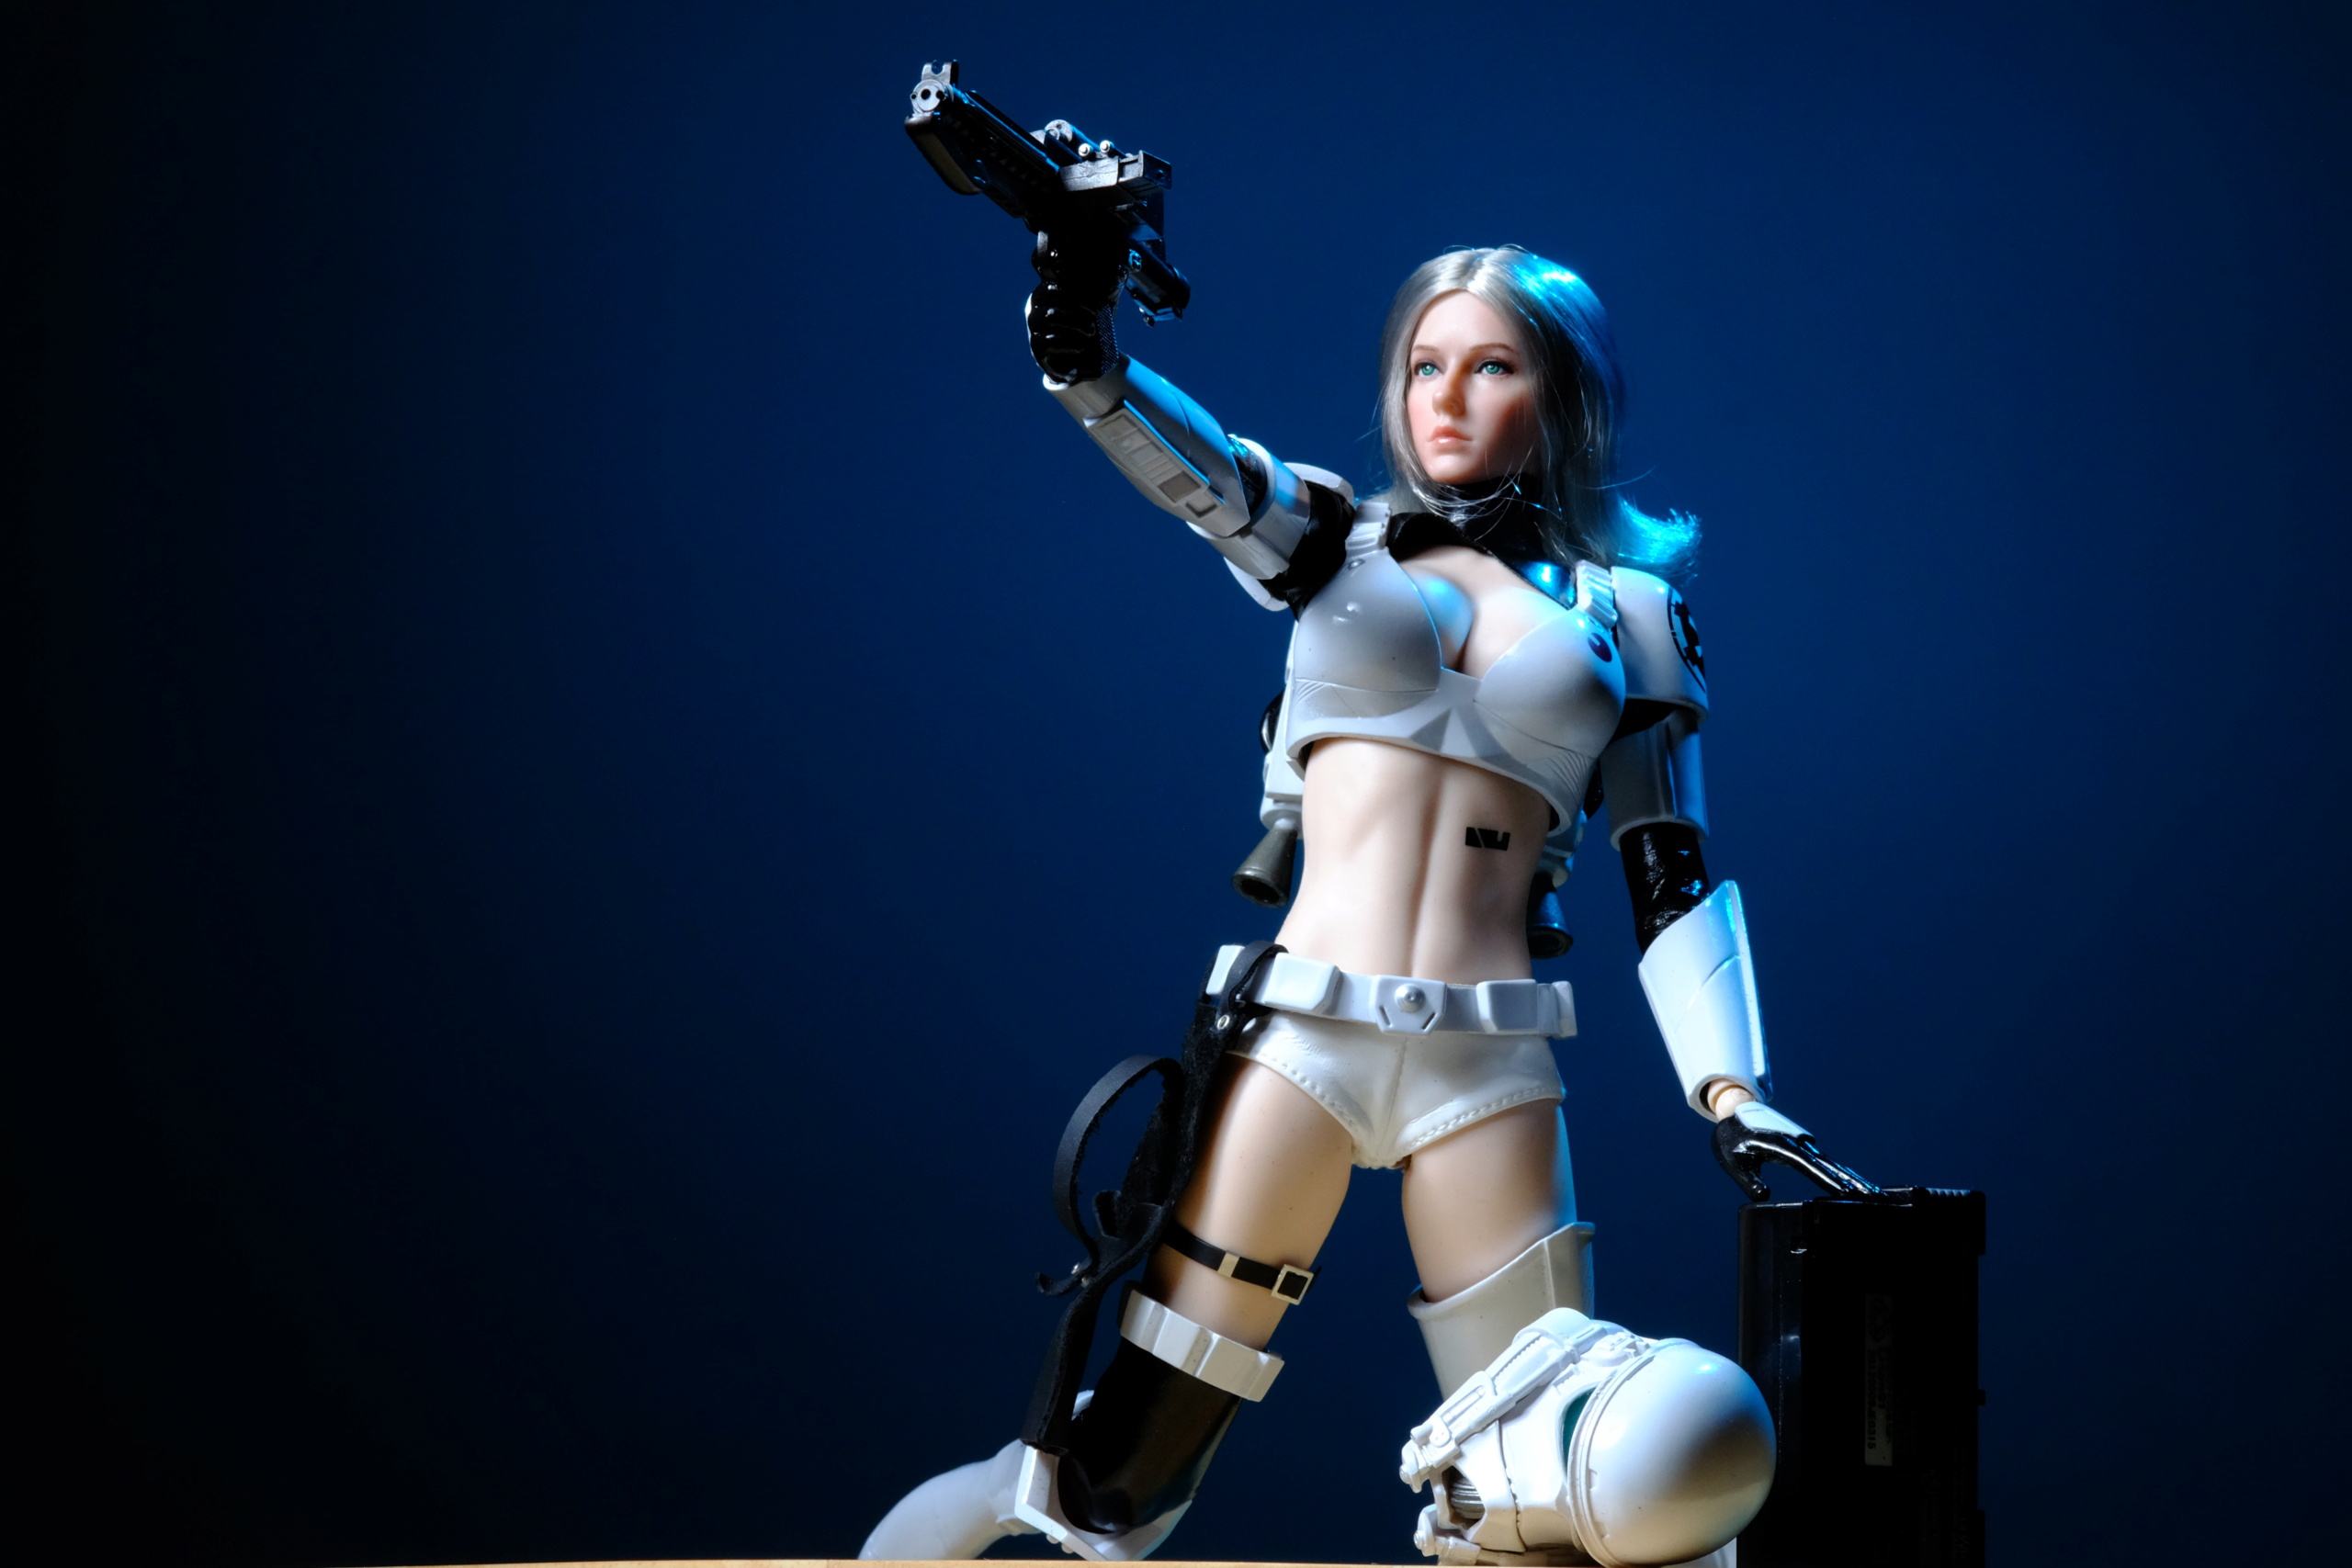 cosplay - NEW PRODUCT: WAR STORY TOYS: 1/6 Empire Commandos (Female) - Assault + Red Random Limited Edition #WS015/S Fuji1117